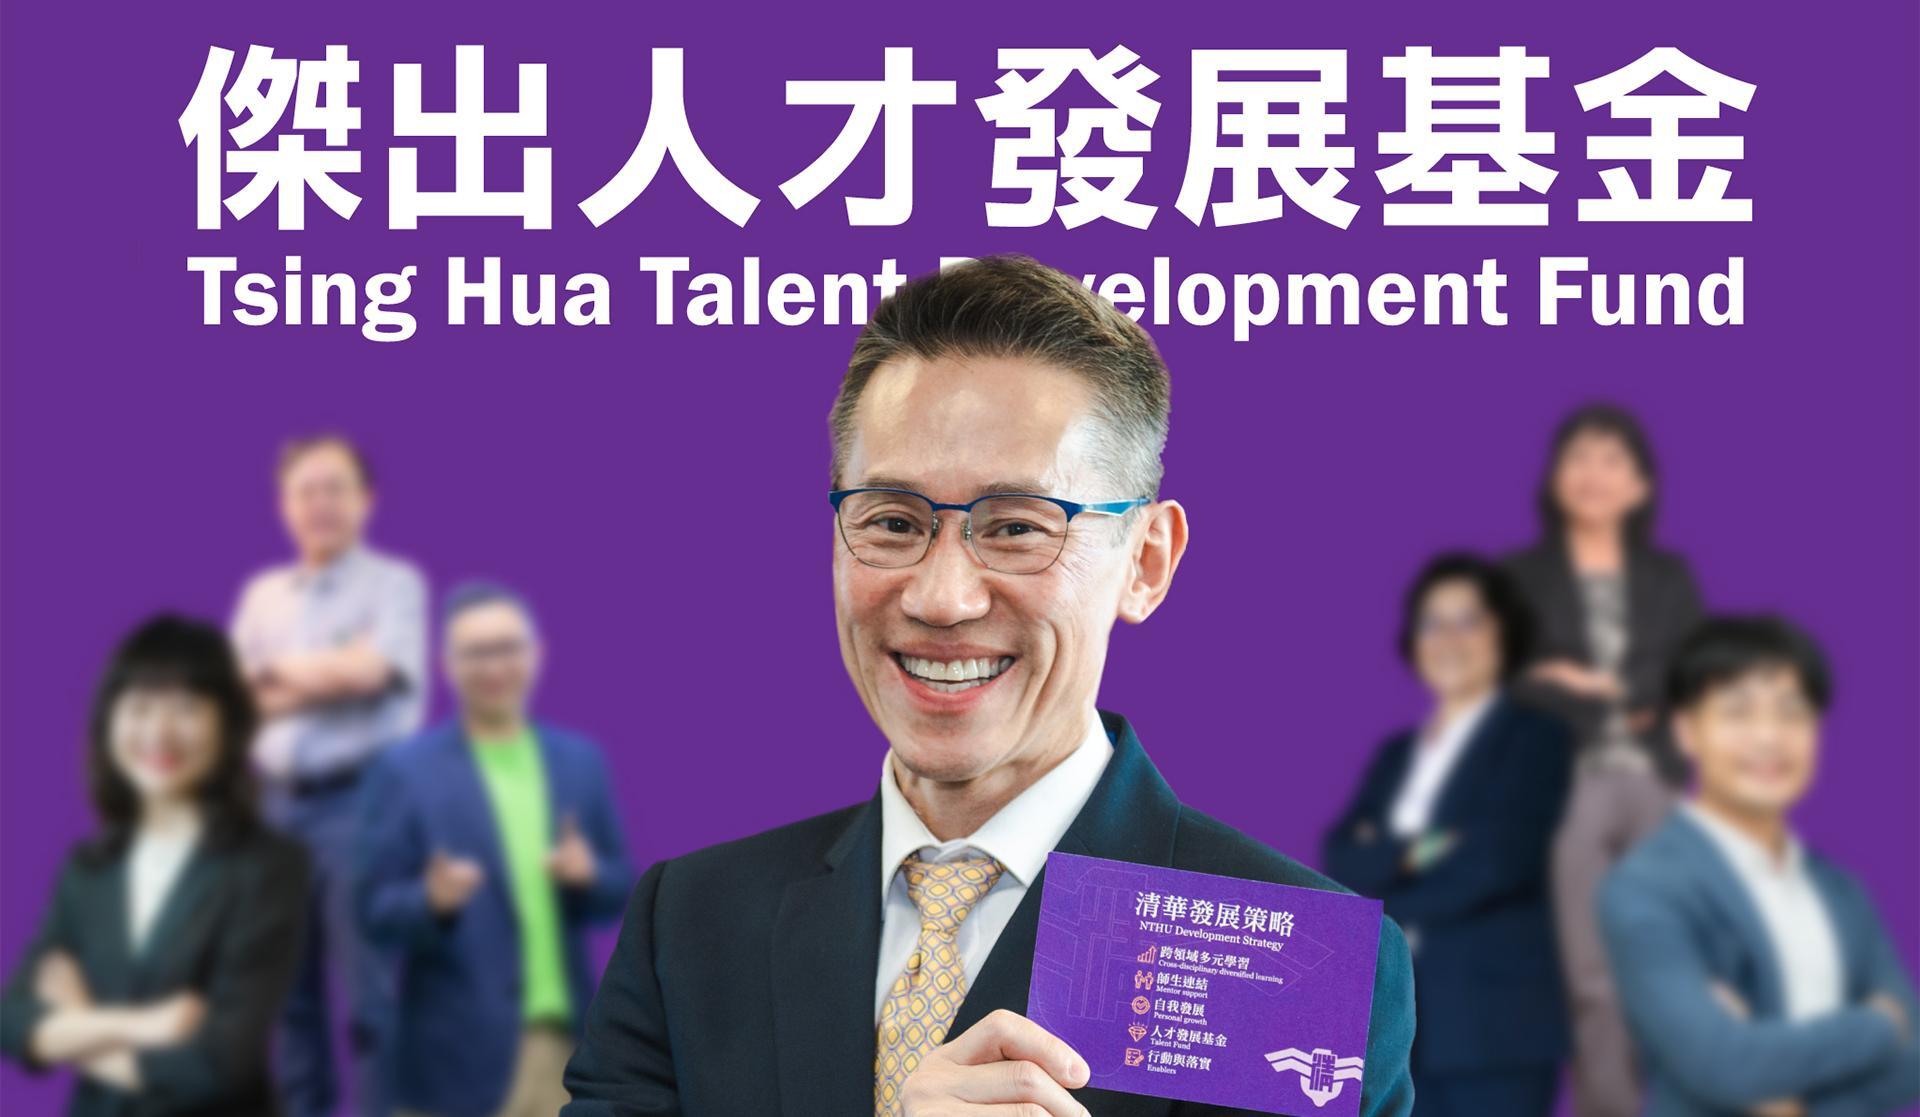 NTHU launched the Tsing Hua Talent Development Fund to attract and retain exceptional faculty members. The fund aims to provide merit-based supplements up to 600%, 640%, and 430% of the base salary for assistant, associate, and full professors starting next month. 